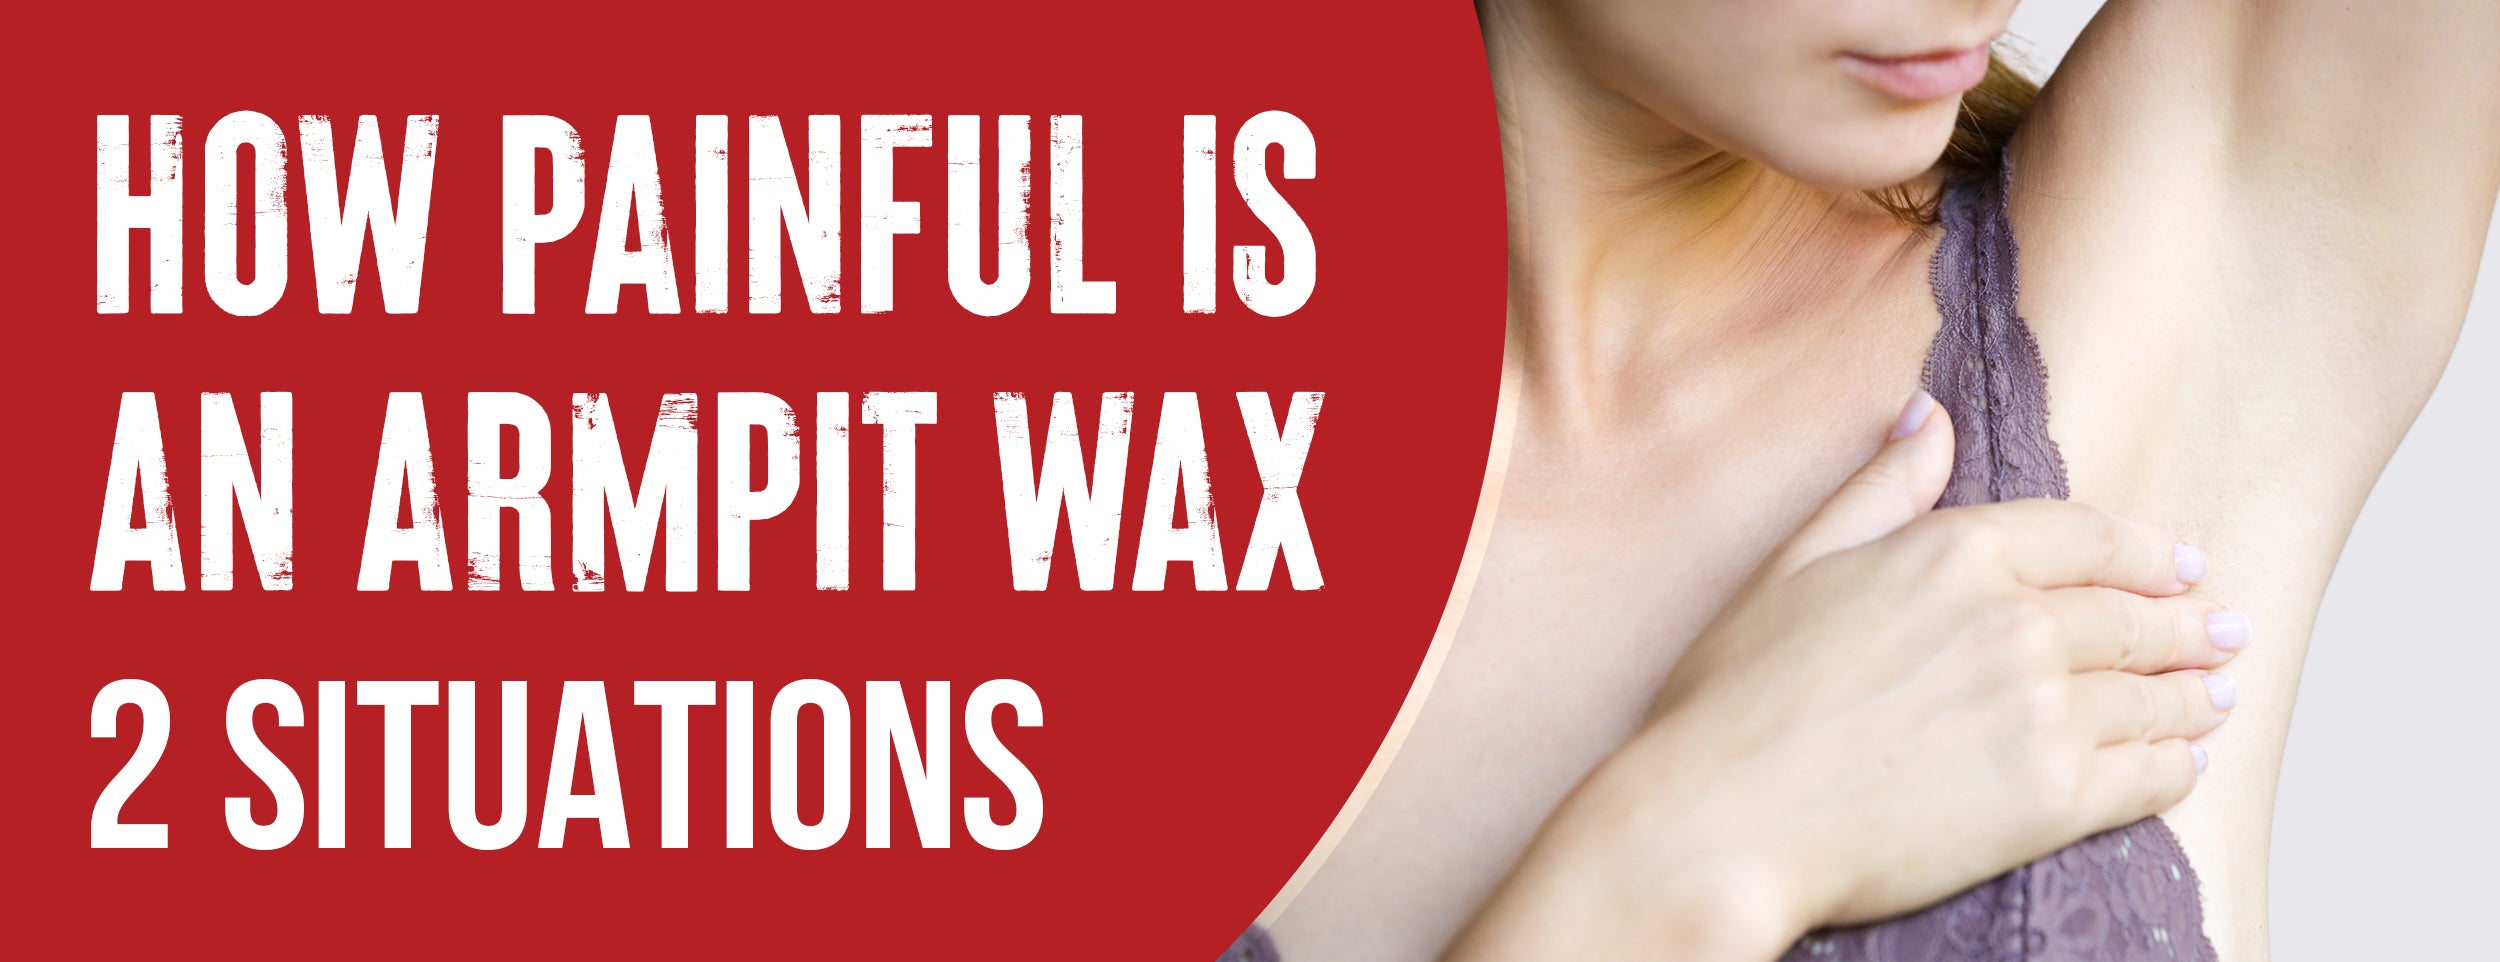  Level and factors affecting armpit wax pain